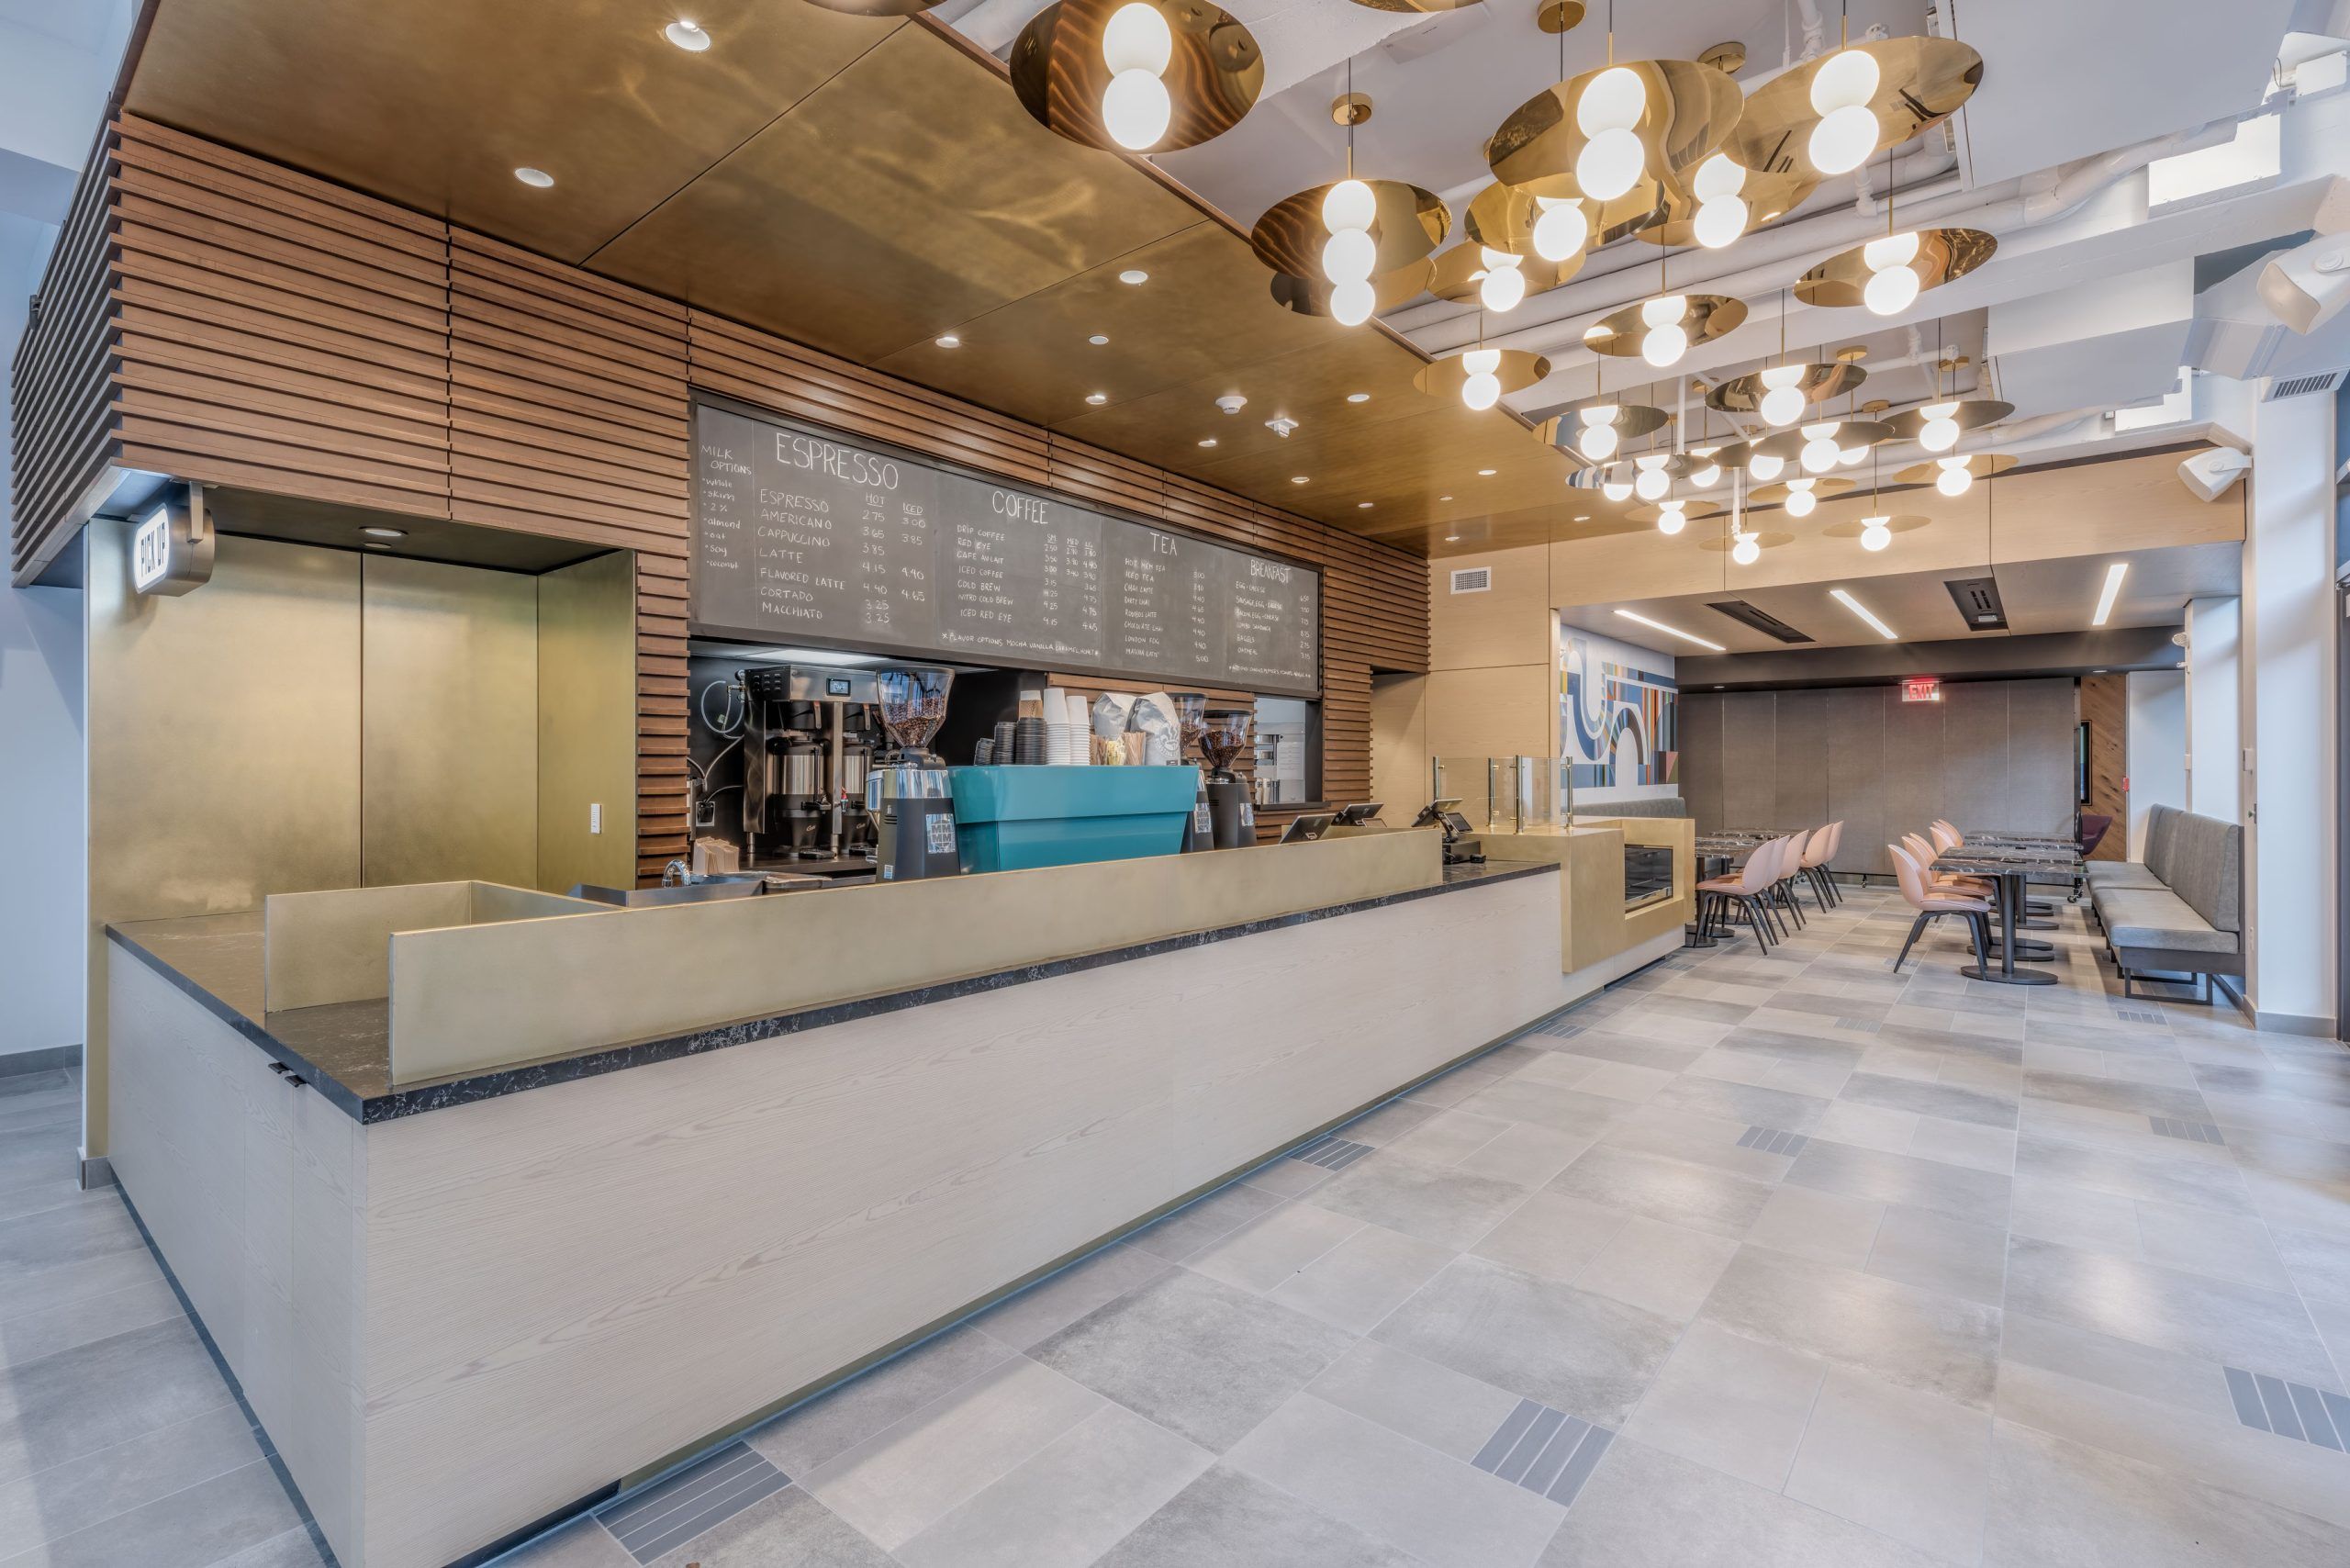 SERVING COMMUNITY AND COFFEE: WISE CONSTRUCTION BUILDS NEW CAFÉ IN CAMBRIDGE, MA